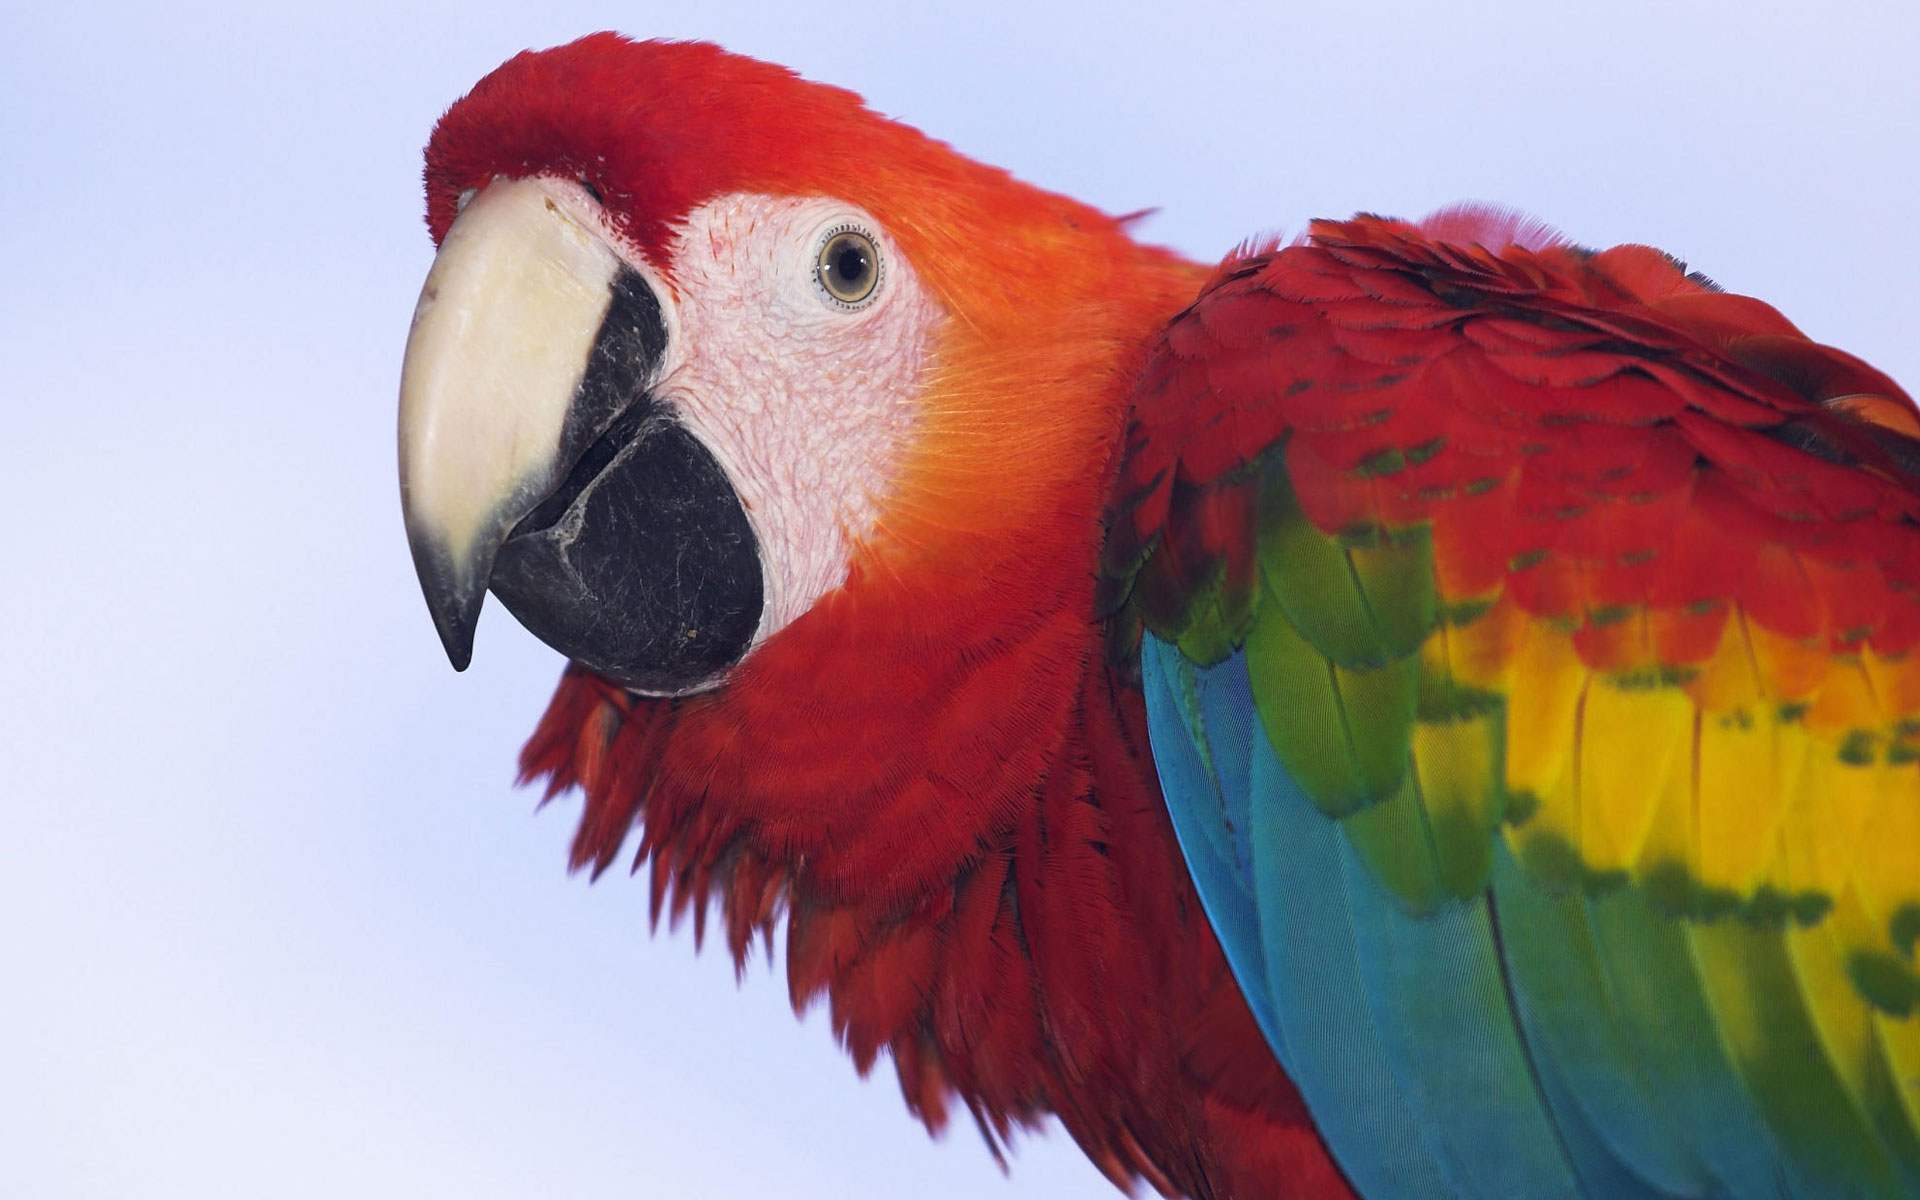 Profile of a Scarlet Macaw439334853 - Profile of a Scarlet Macaw - Scarlet, Profile, Macaw, Liberty